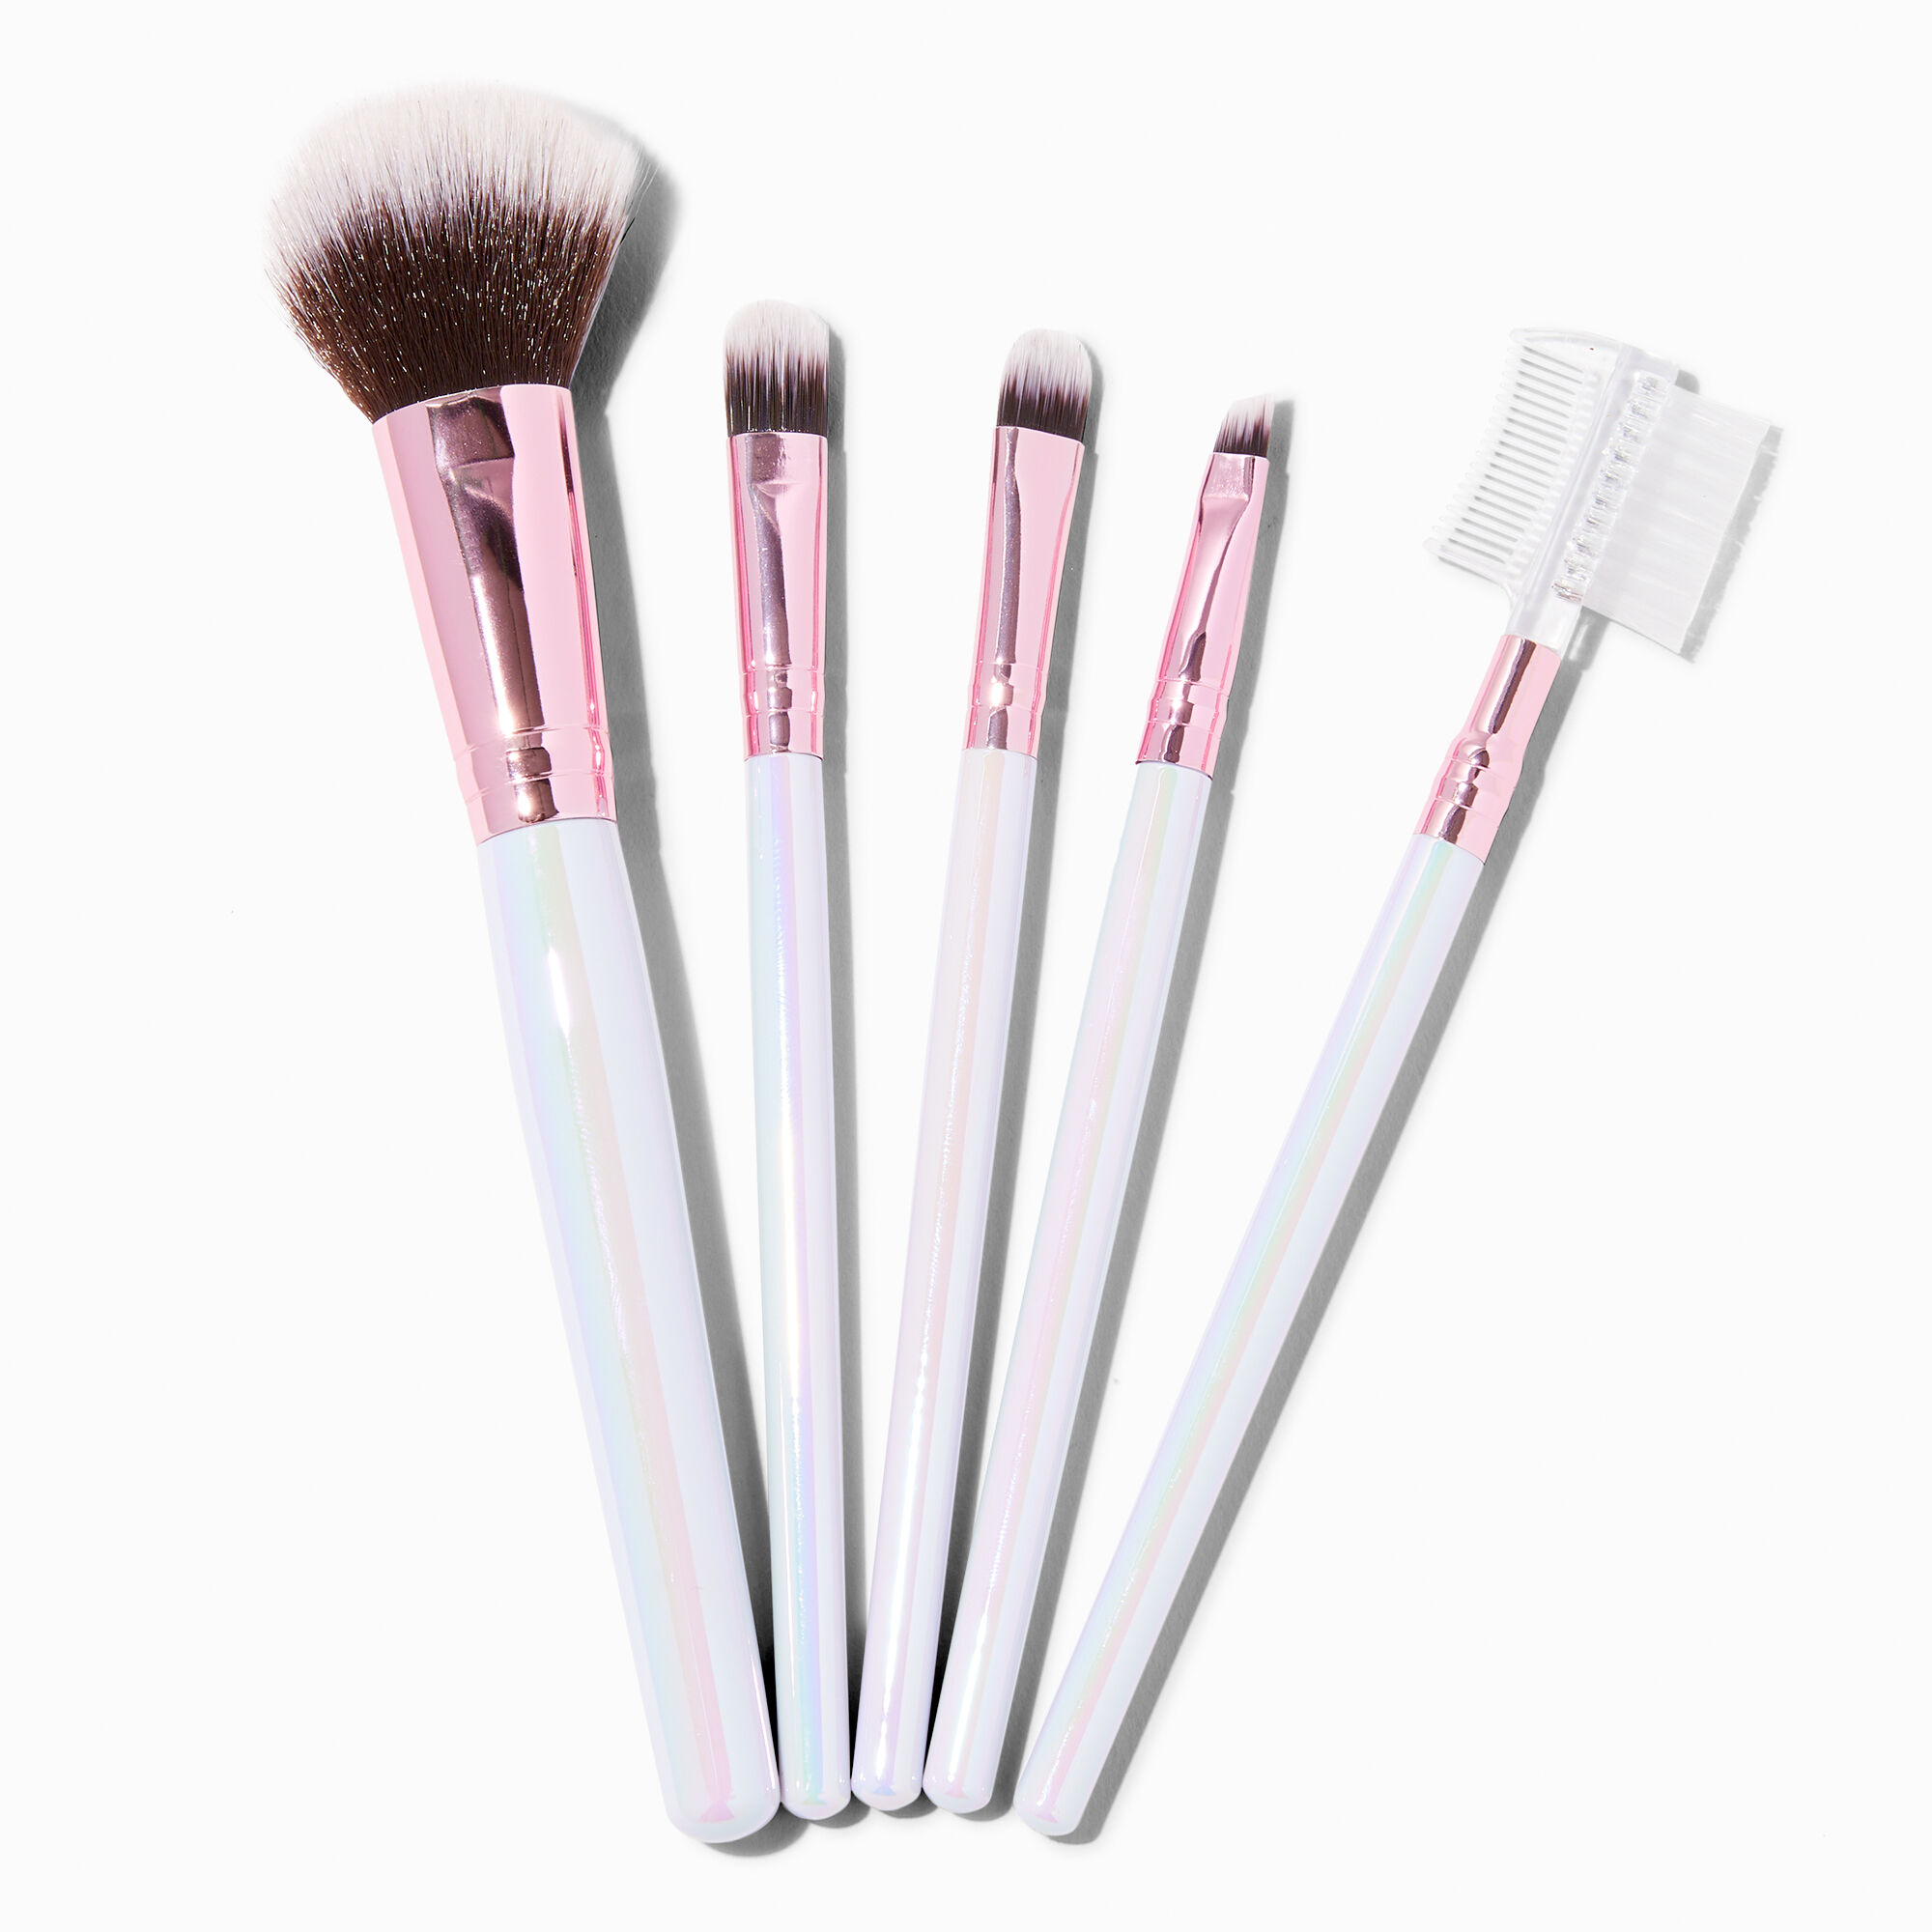 View Claires Holographic Makeup Brush Set 5 Pack Pink information